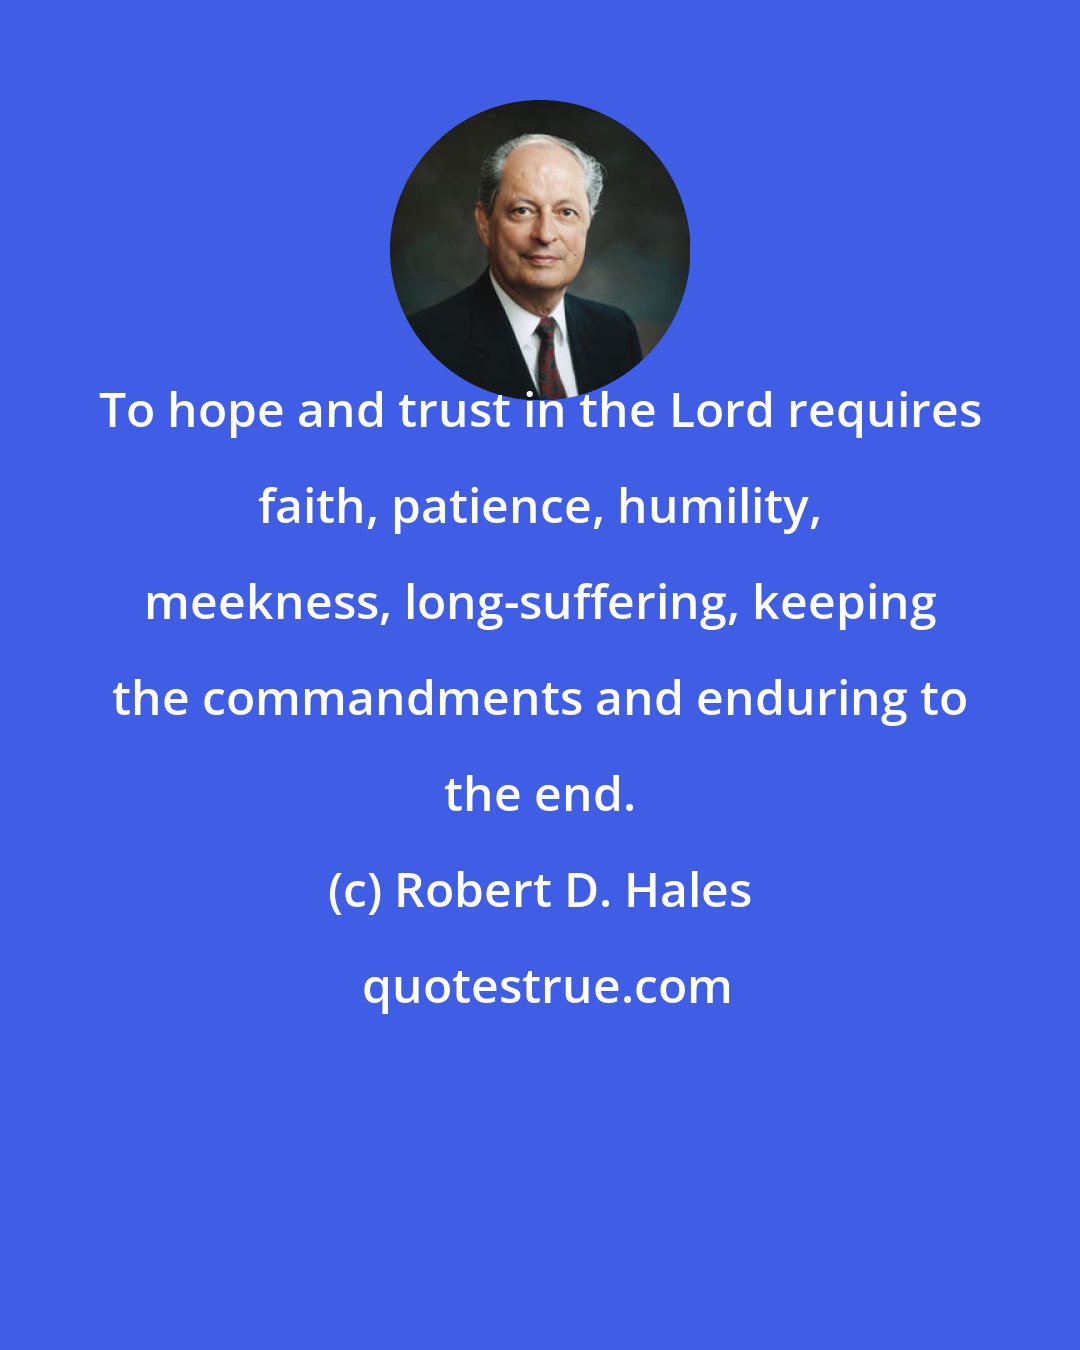 Robert D. Hales: To hope and trust in the Lord requires faith, patience, humility, meekness, long-suffering, keeping the commandments and enduring to the end.